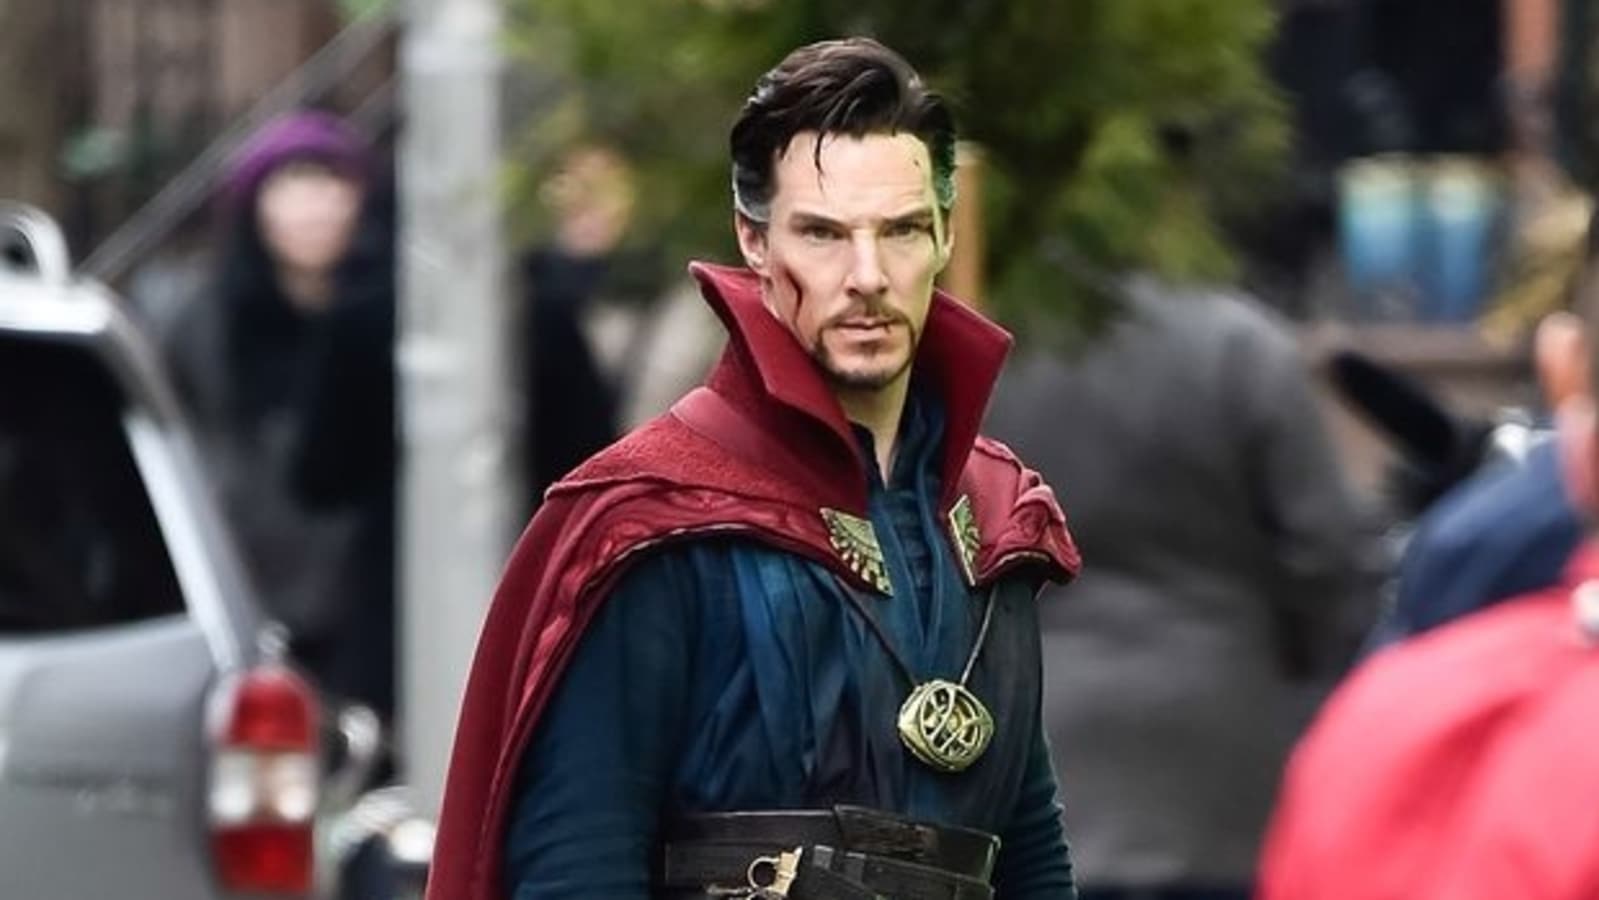 Doctor Strange in the Multiverse of Madness: New promo of Benedict Cumberbatch film reveals fan-favourite secret society